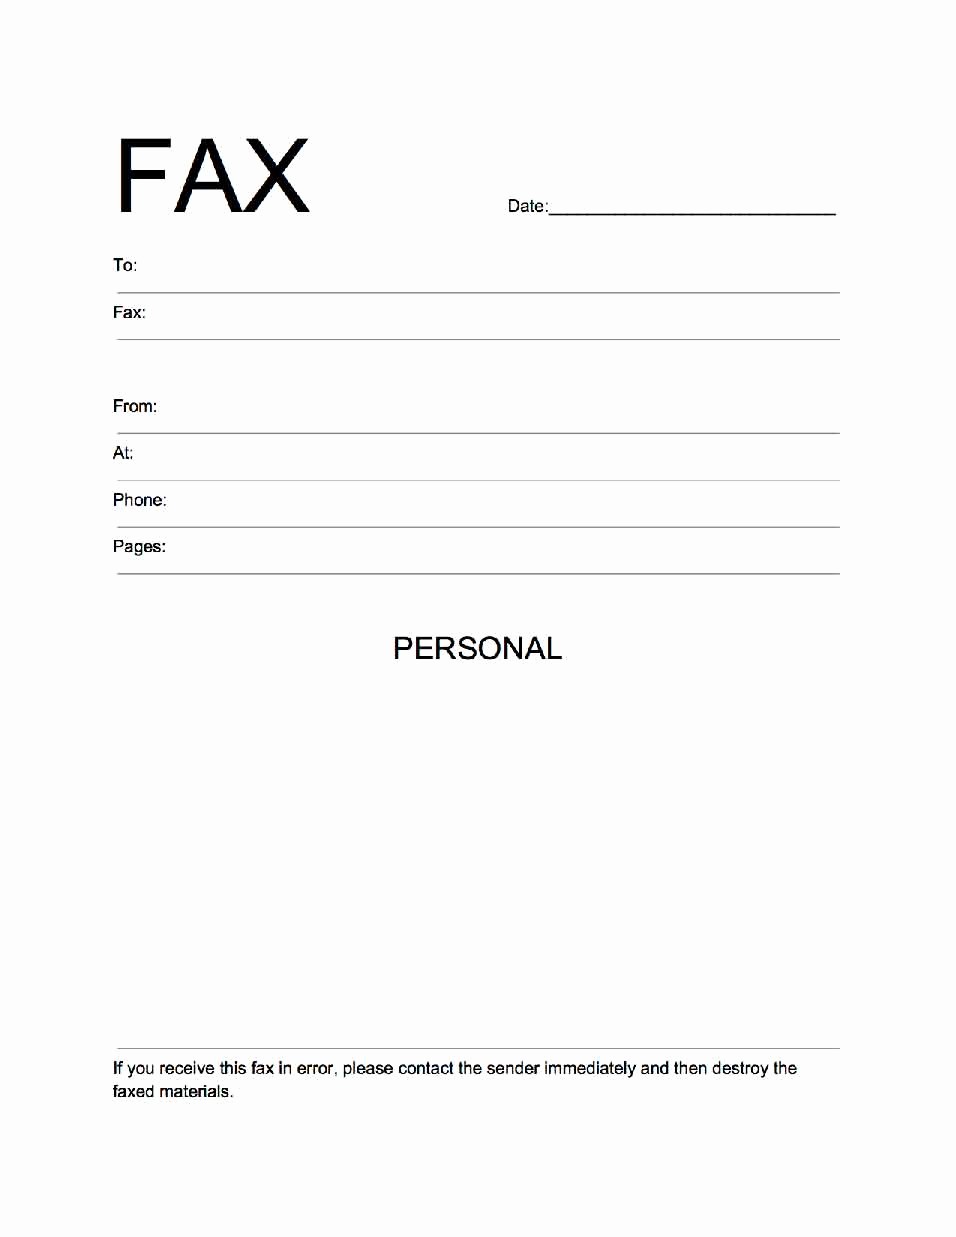 Cover Sheet for A Fax Luxury Printable Standard Fax Cover Sheet Printable Pages